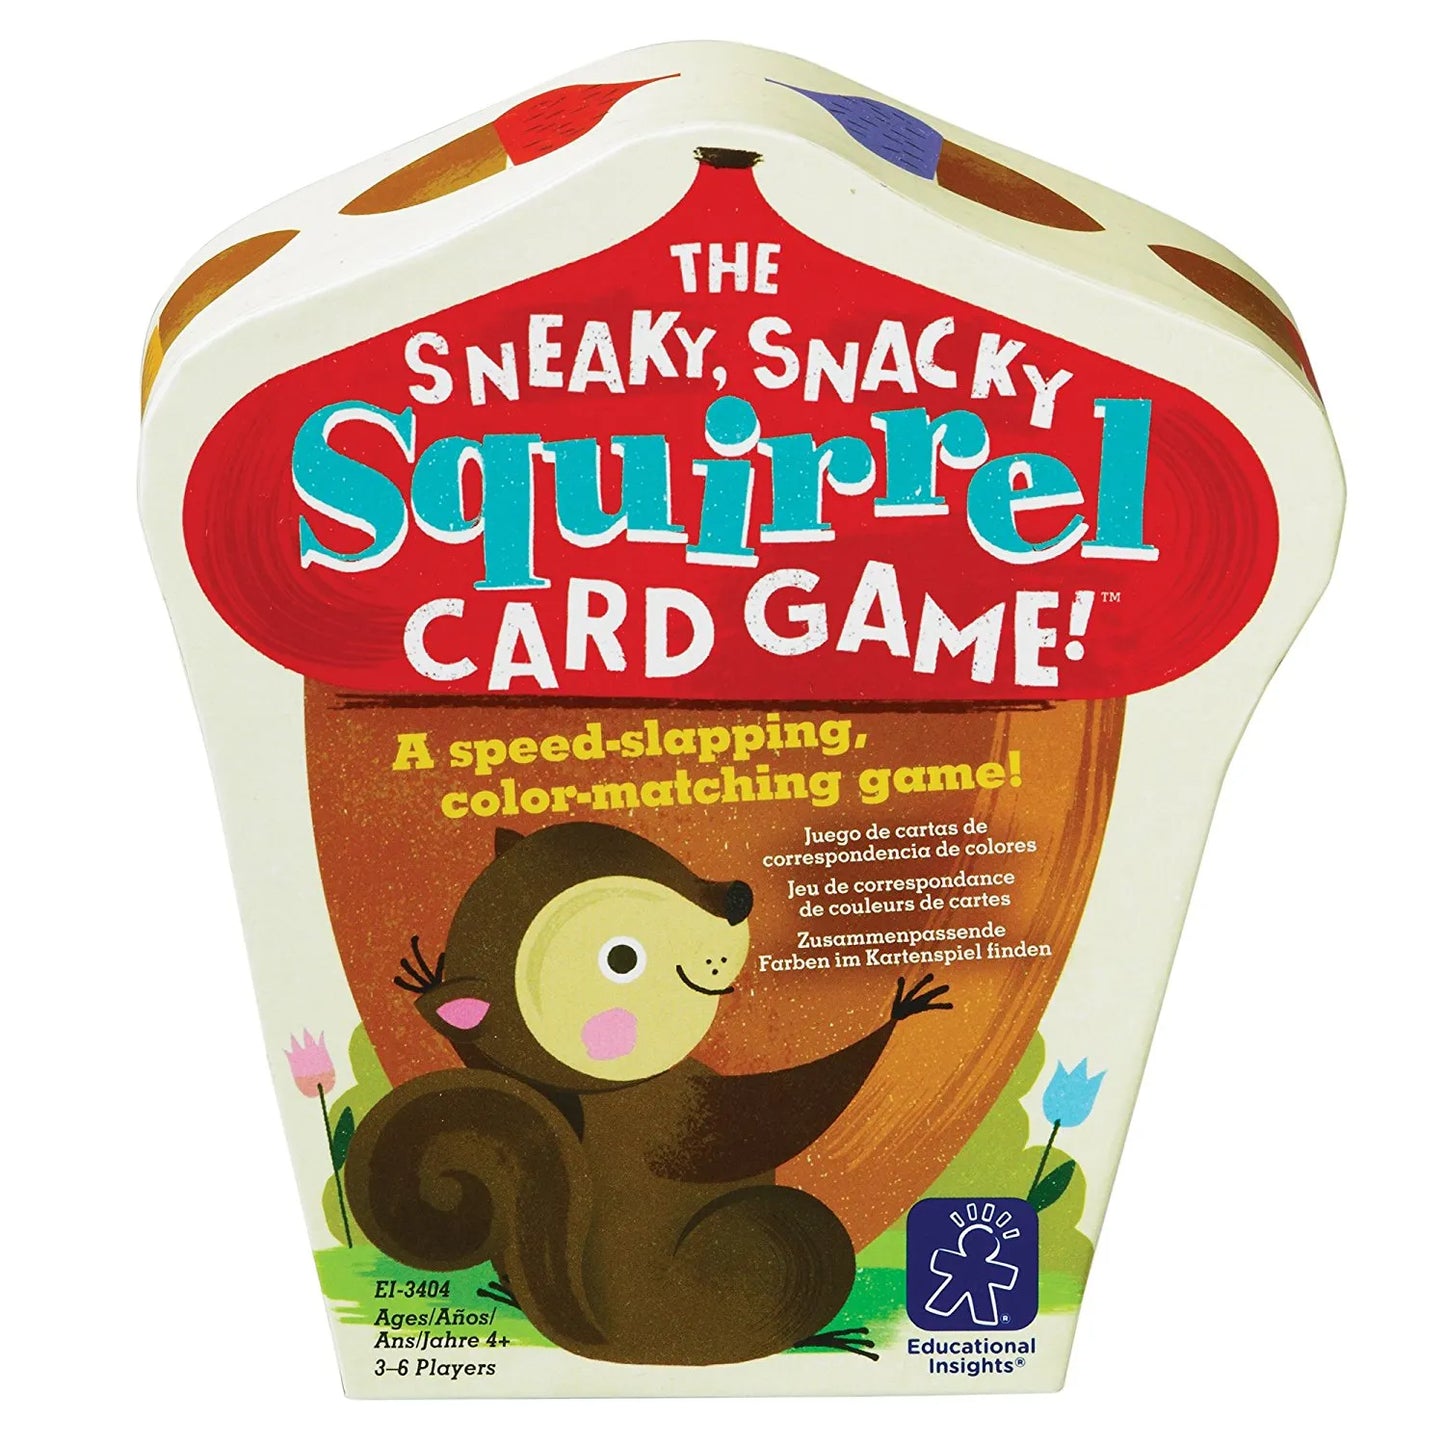 Educational Insights The Sneaky Snacky Squirrel Card Game!